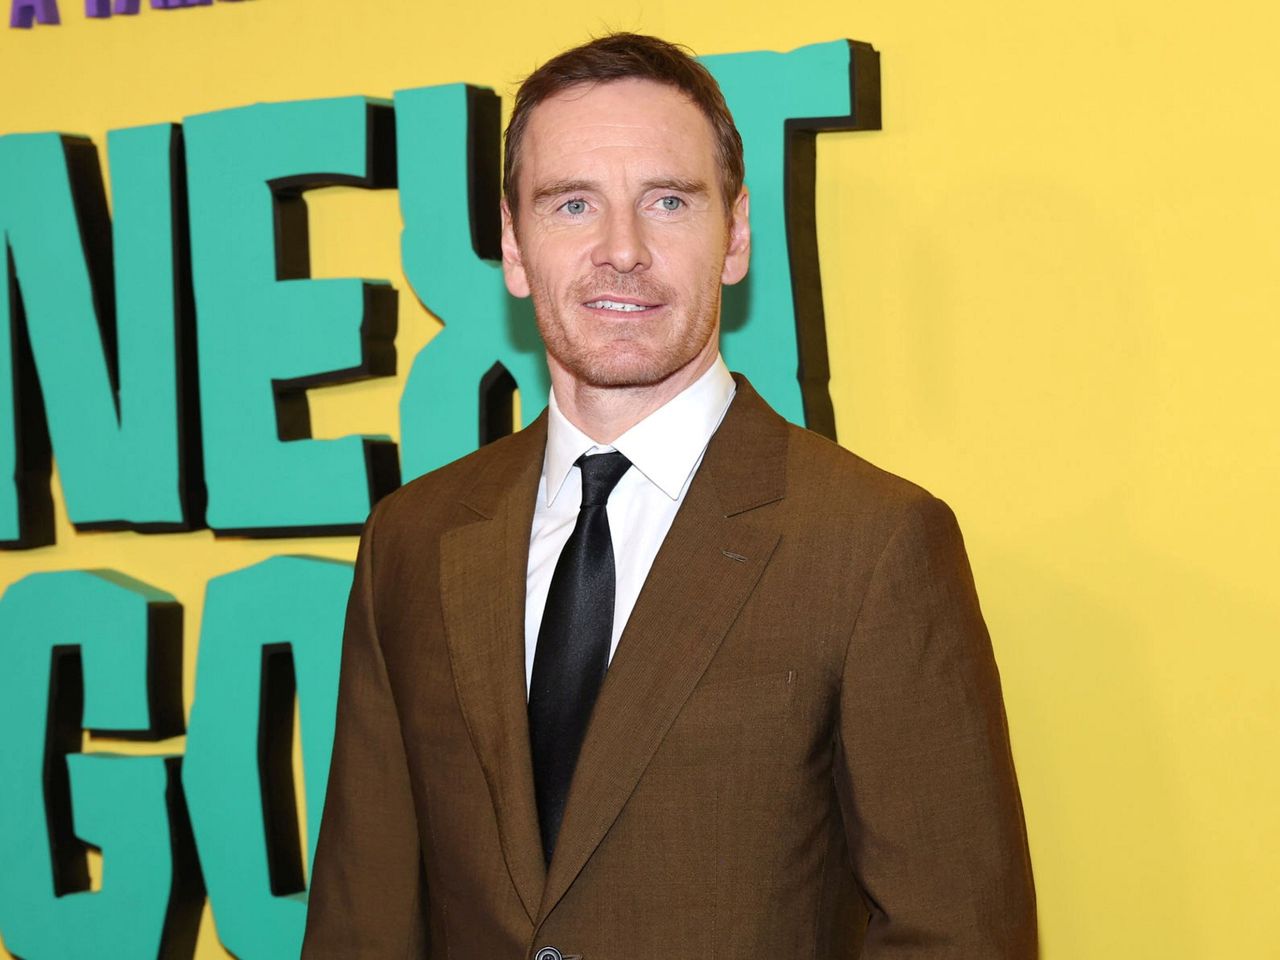 Everything You Need to Know From Michael Fassbender's (Very